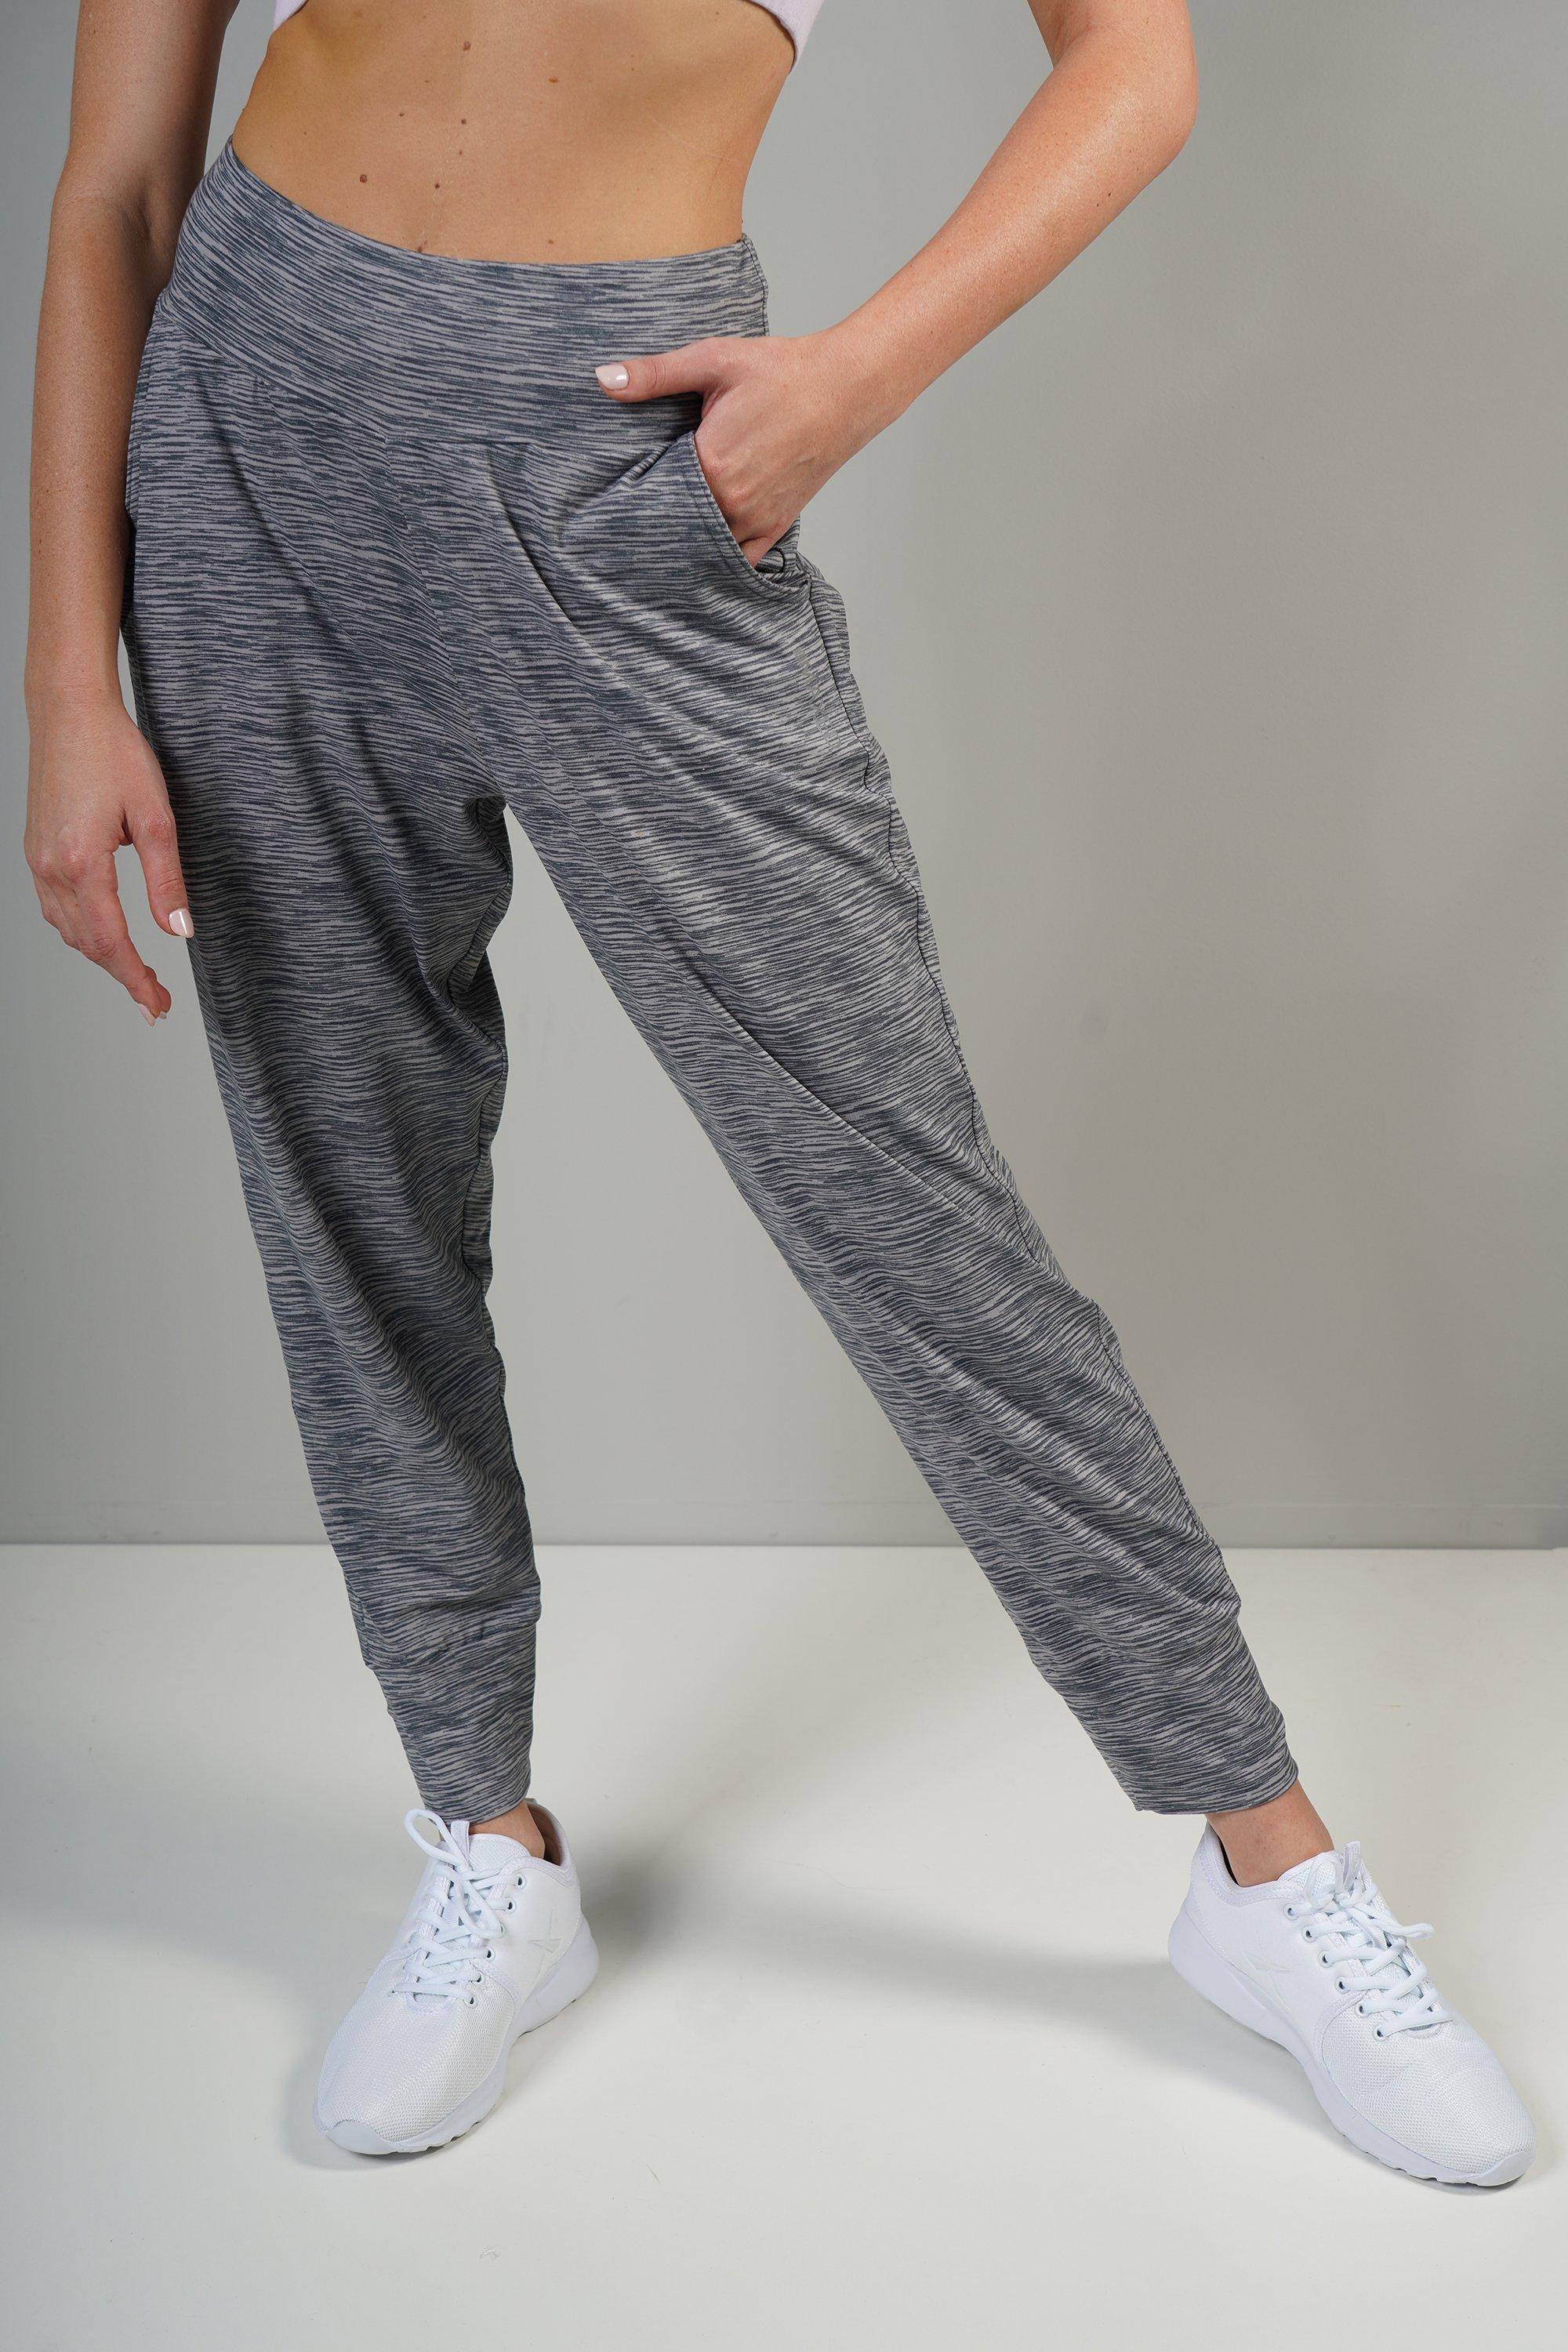 Asquith Keep Moving Pants Grey Marl: Medium - PLAISIRS - Wellbeing and  Lifestyle Products & Gifts